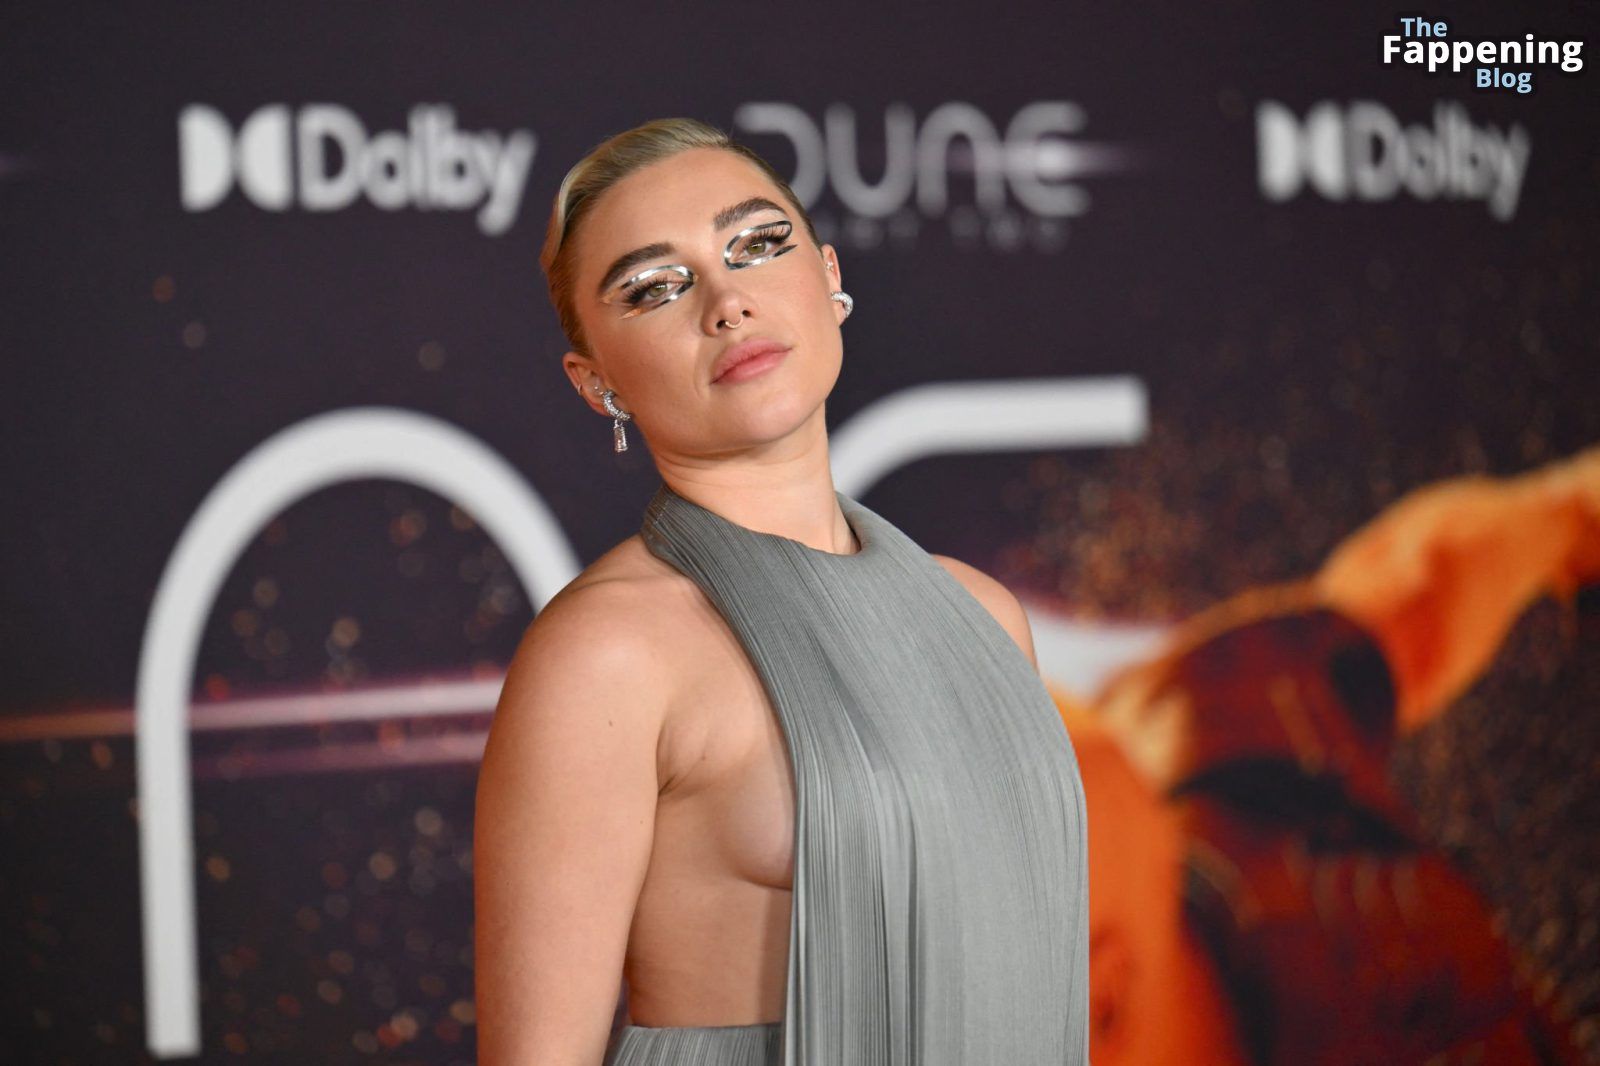 florence-pugh-braless-side-boobs-dune-part-two-premiere-nyc-5-thefappeningblog.com_.jpg